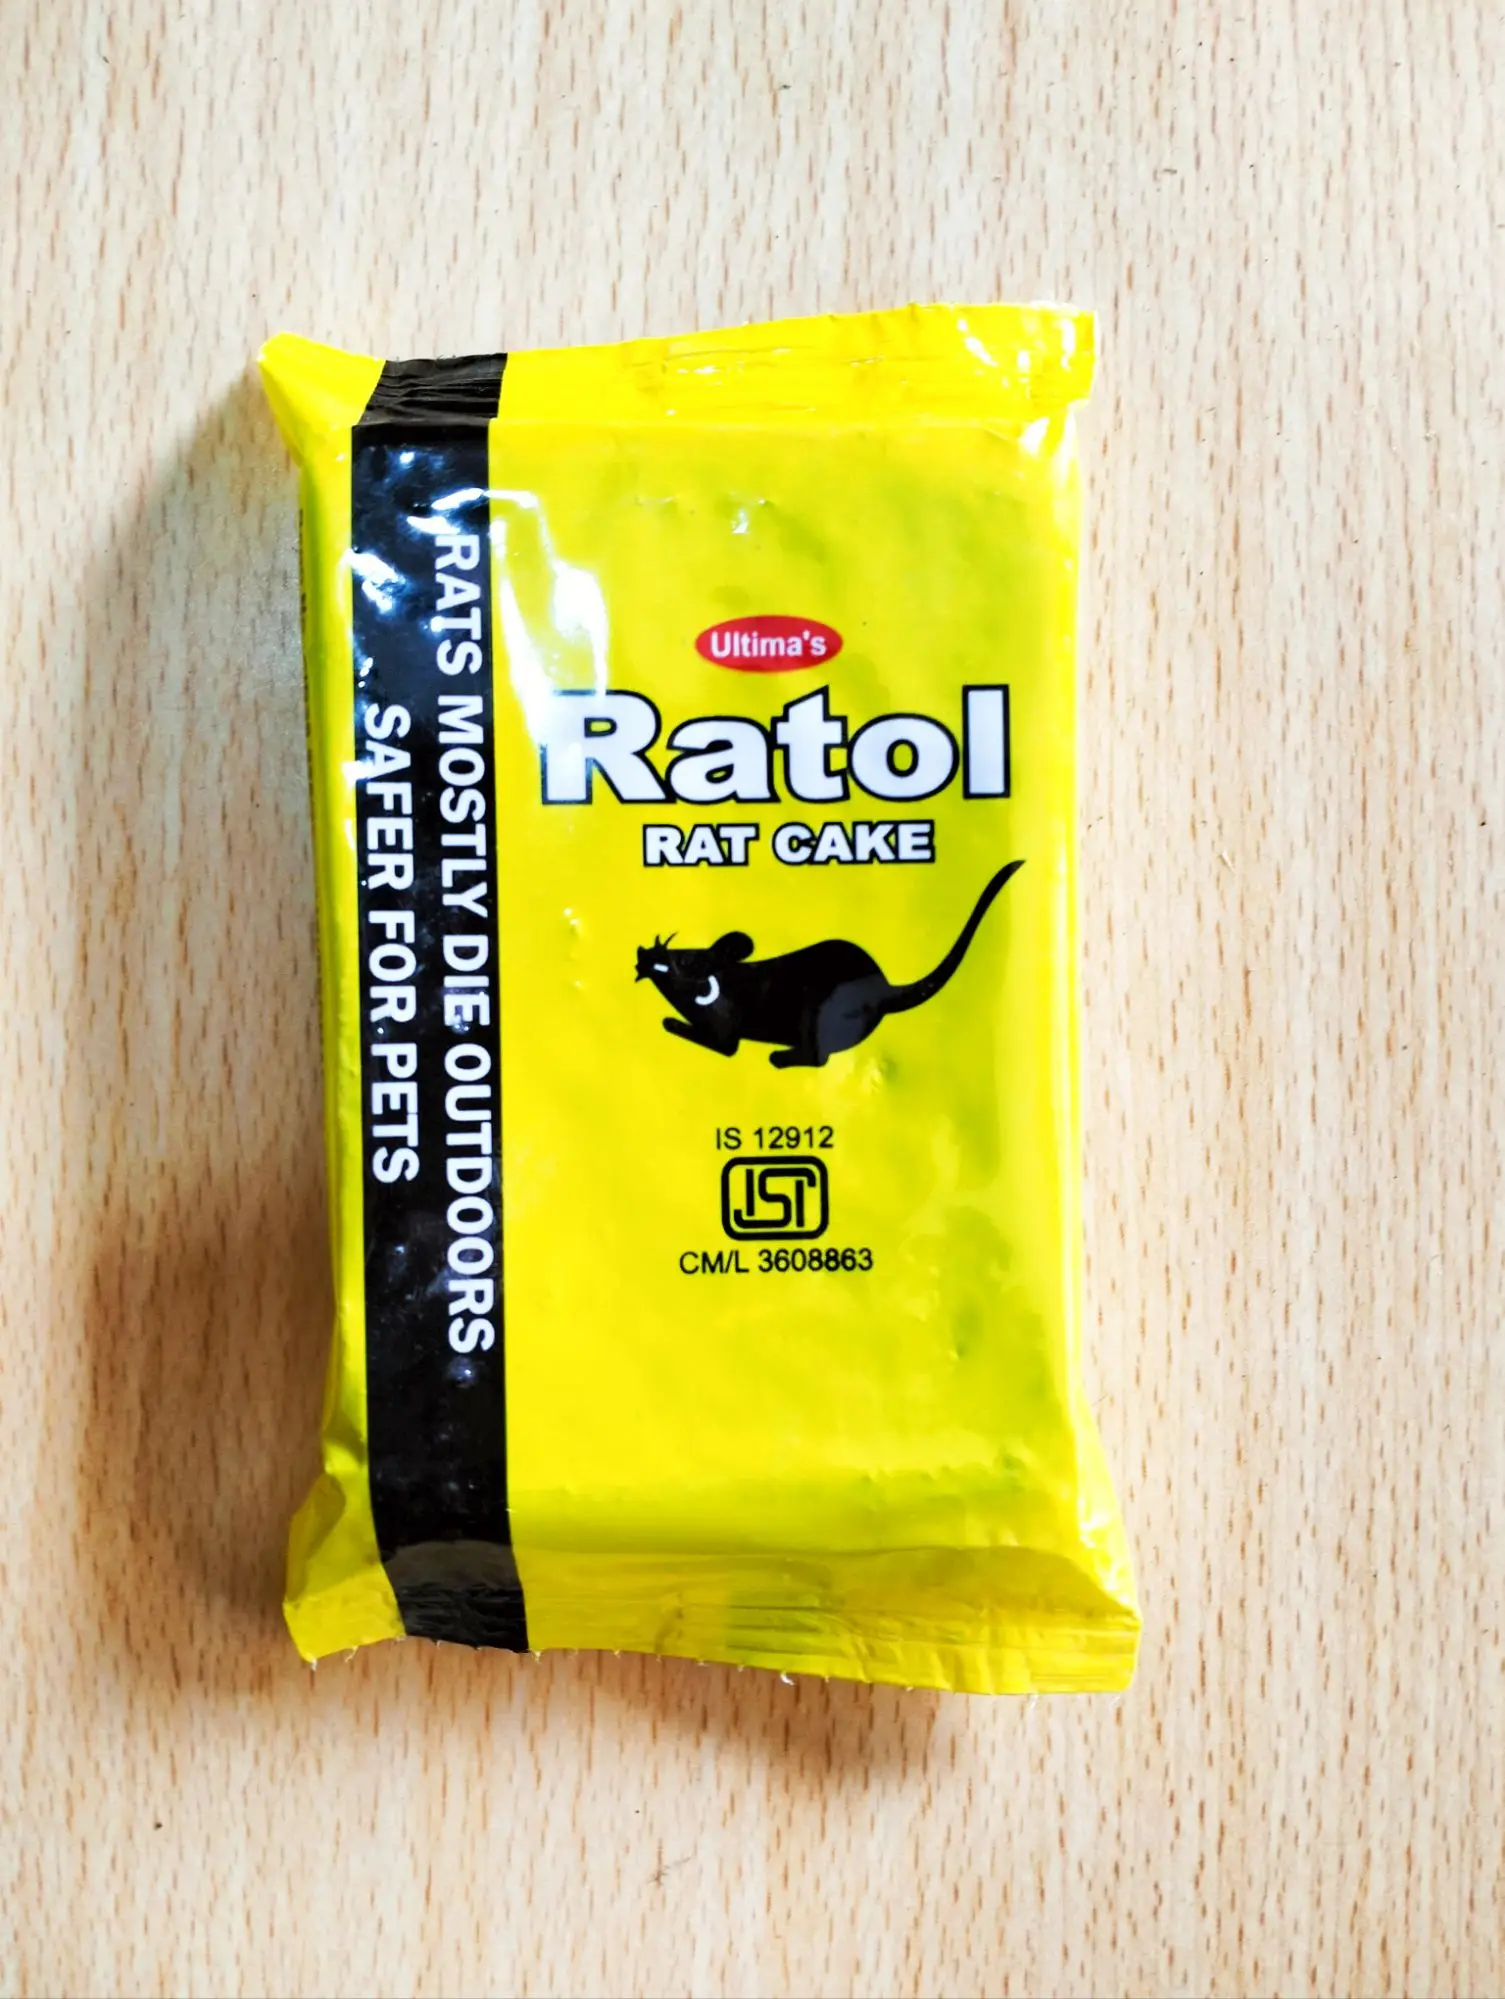 Oh, Rats!: 6 Signs Your Rat Poison Is Not Working - Synergy²